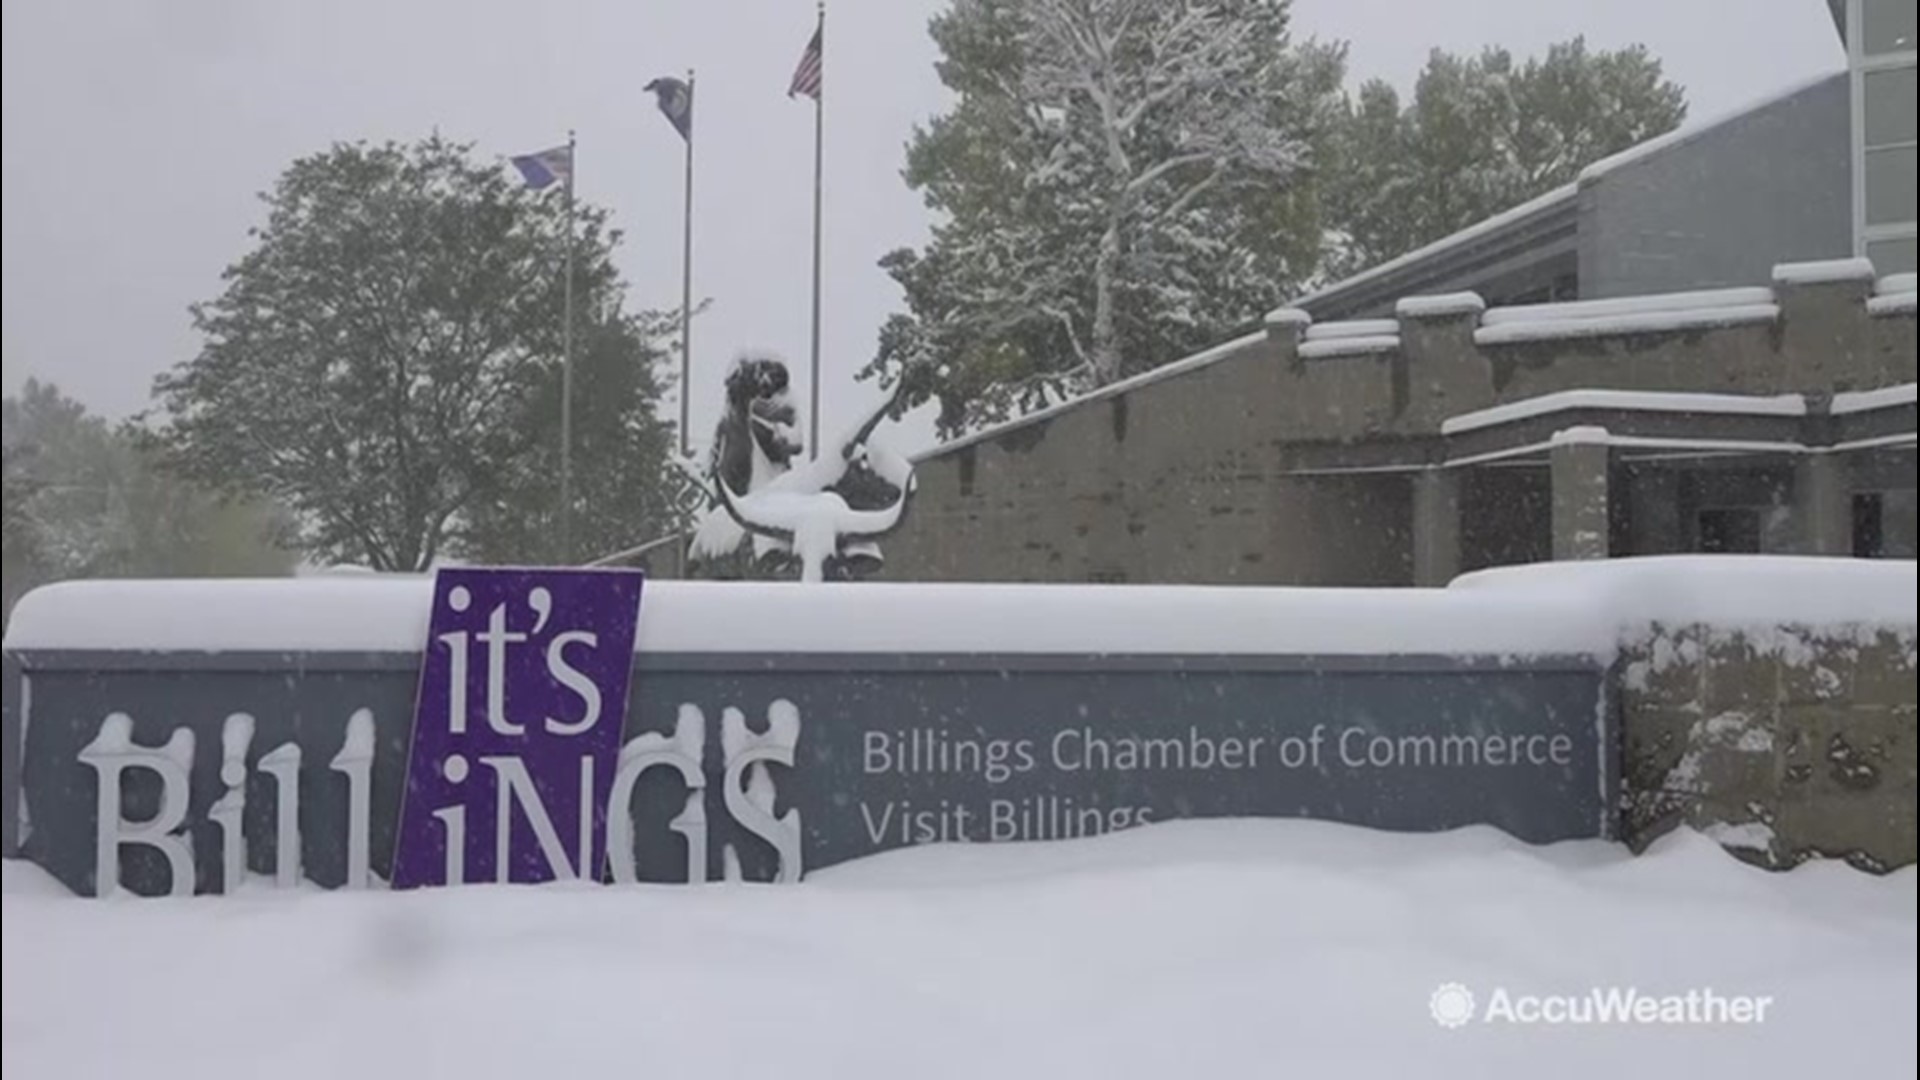 Billings, Montana, had a radical shift in weather on Oct. 9 when skies went from clear and sunny the day before to cloudy and snowy. Jonathan Petramala has the details.